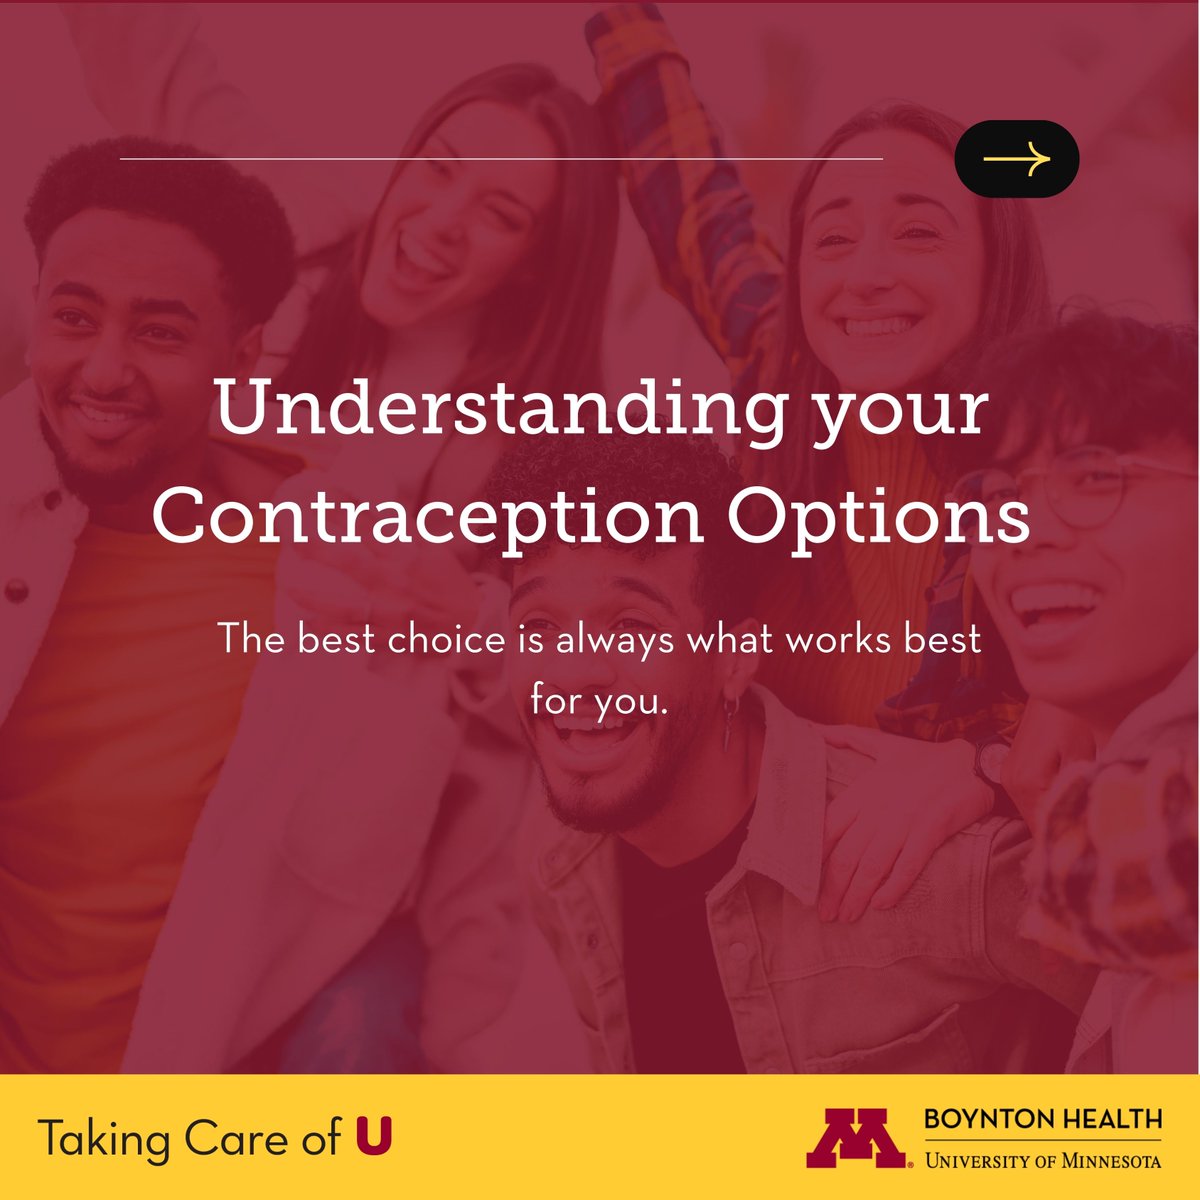 Discover the range of contraception methods. Scroll through our thread to explore your options, and remember, our team is here to guide you. Your health is our priority!  #UMN #TakingCareofU #BoyntonHealth #SaferSex #SaferSex101